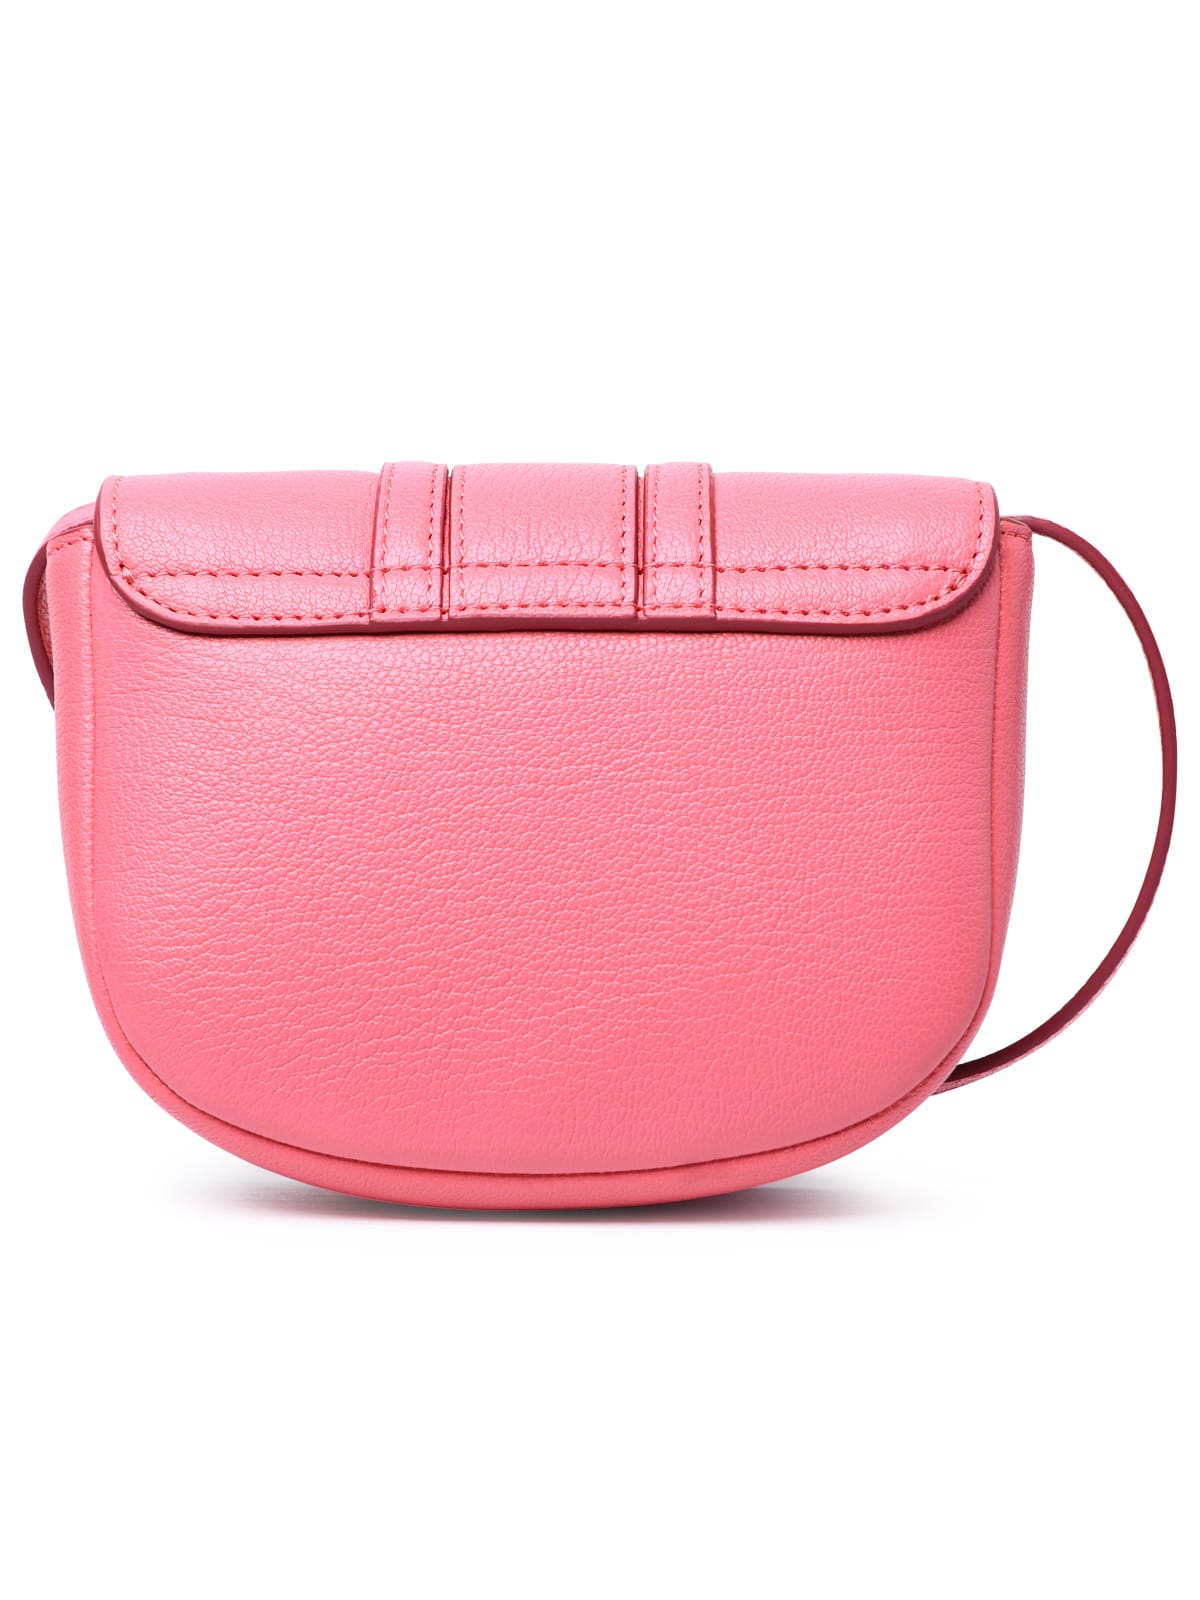 Shop See By Chloé Small Hana Pink Leather Bag